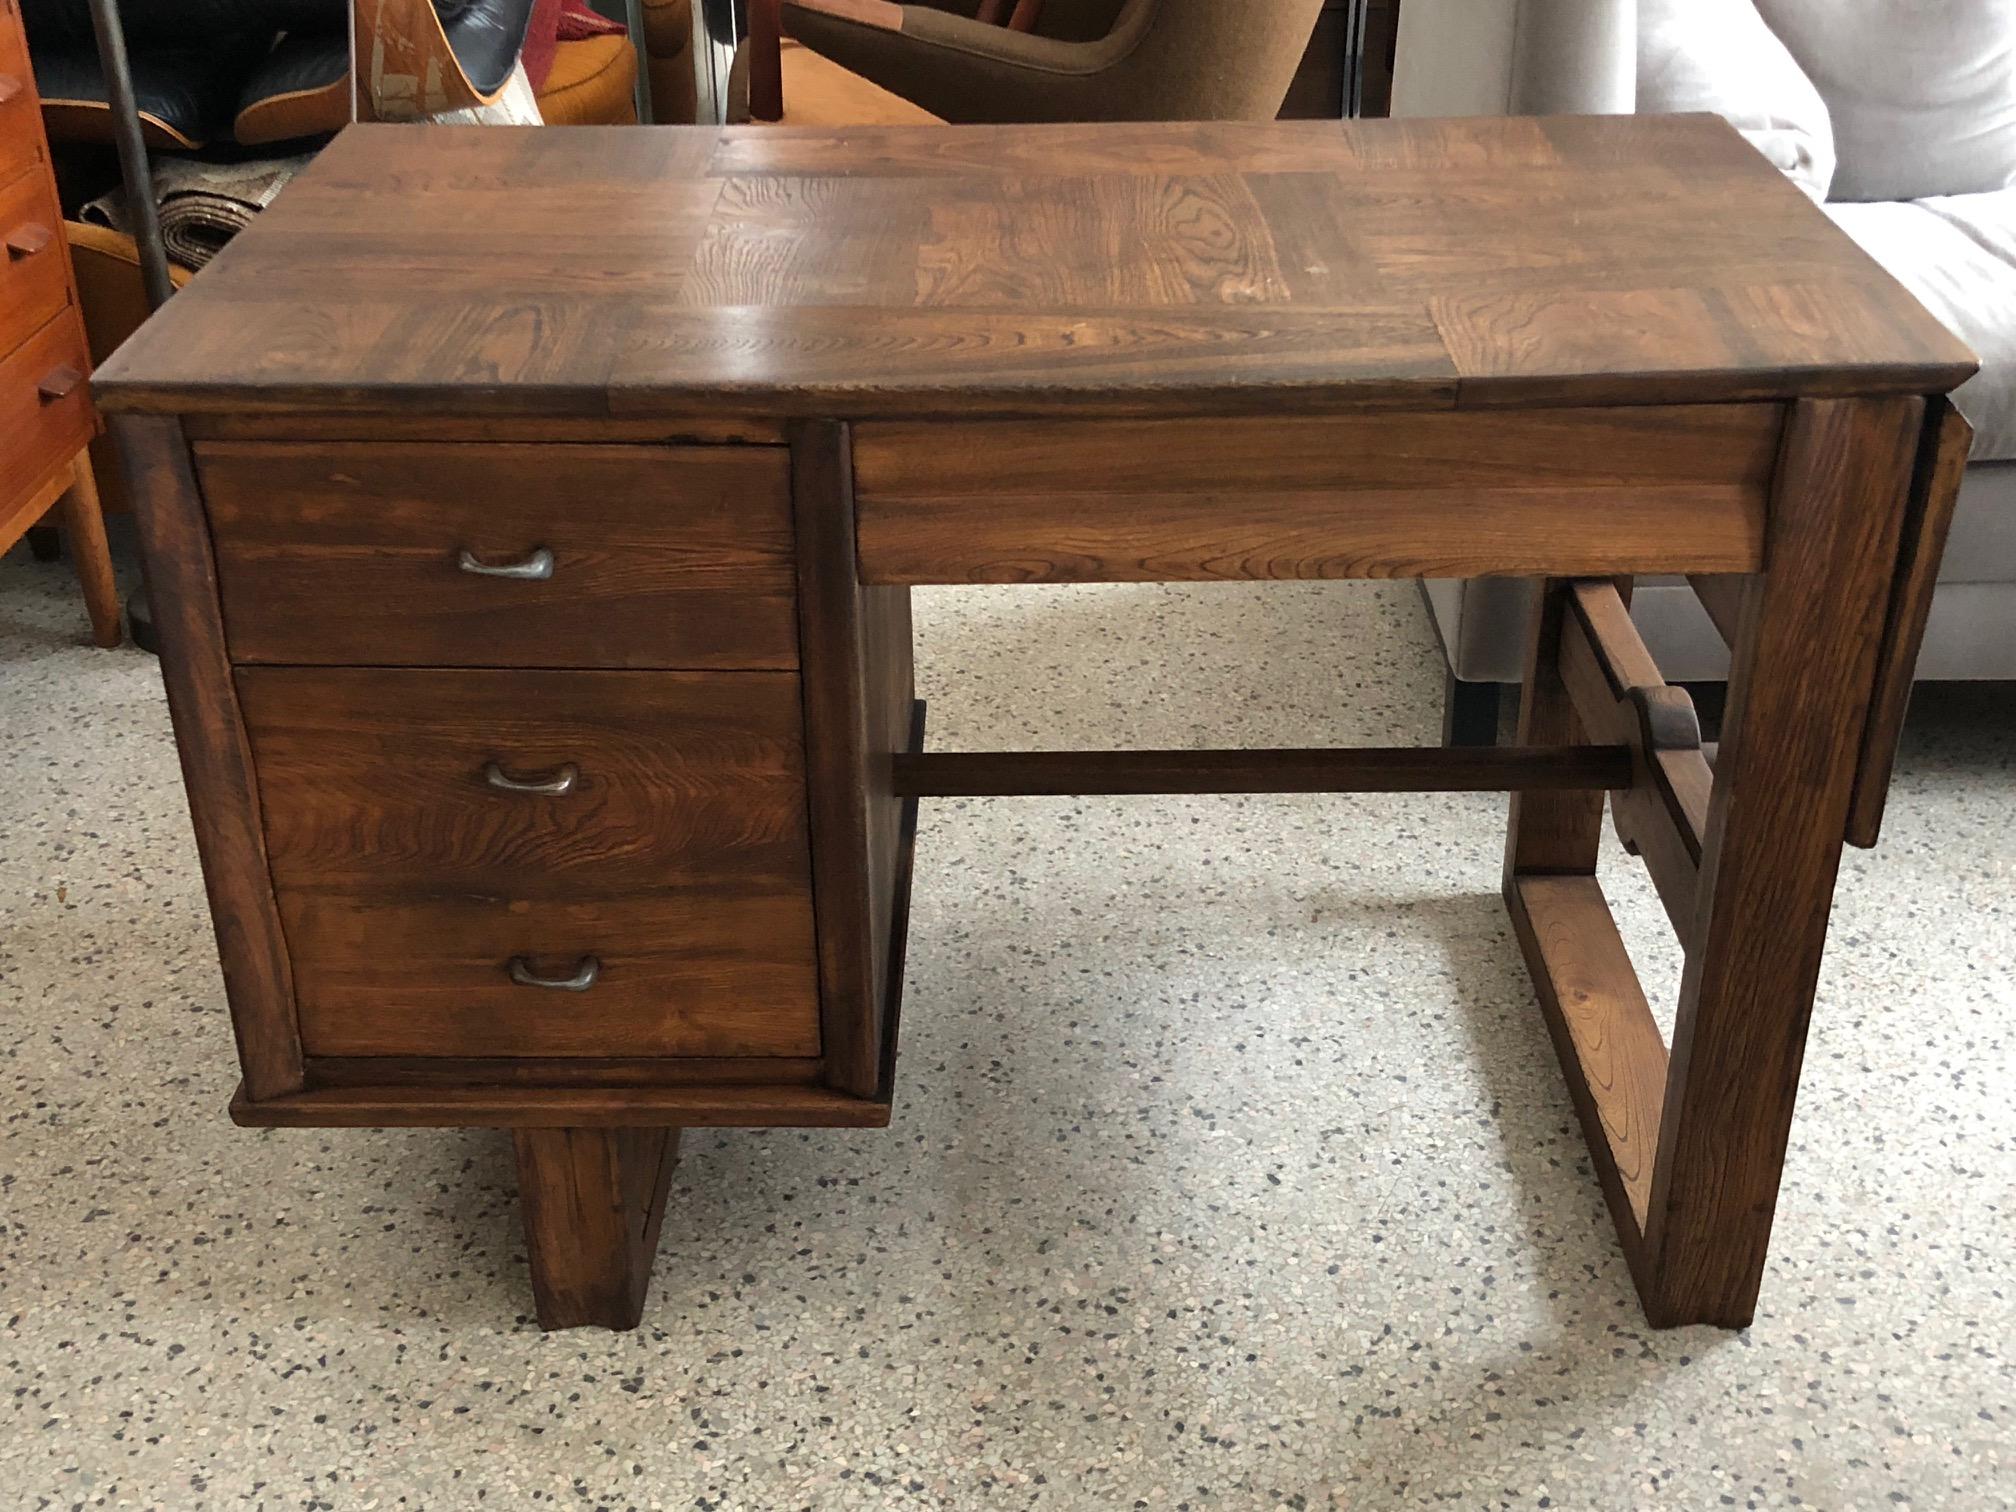 An unusual small desk with drop front by Ray See for See Mar, circa 1950s. Measures 43.35